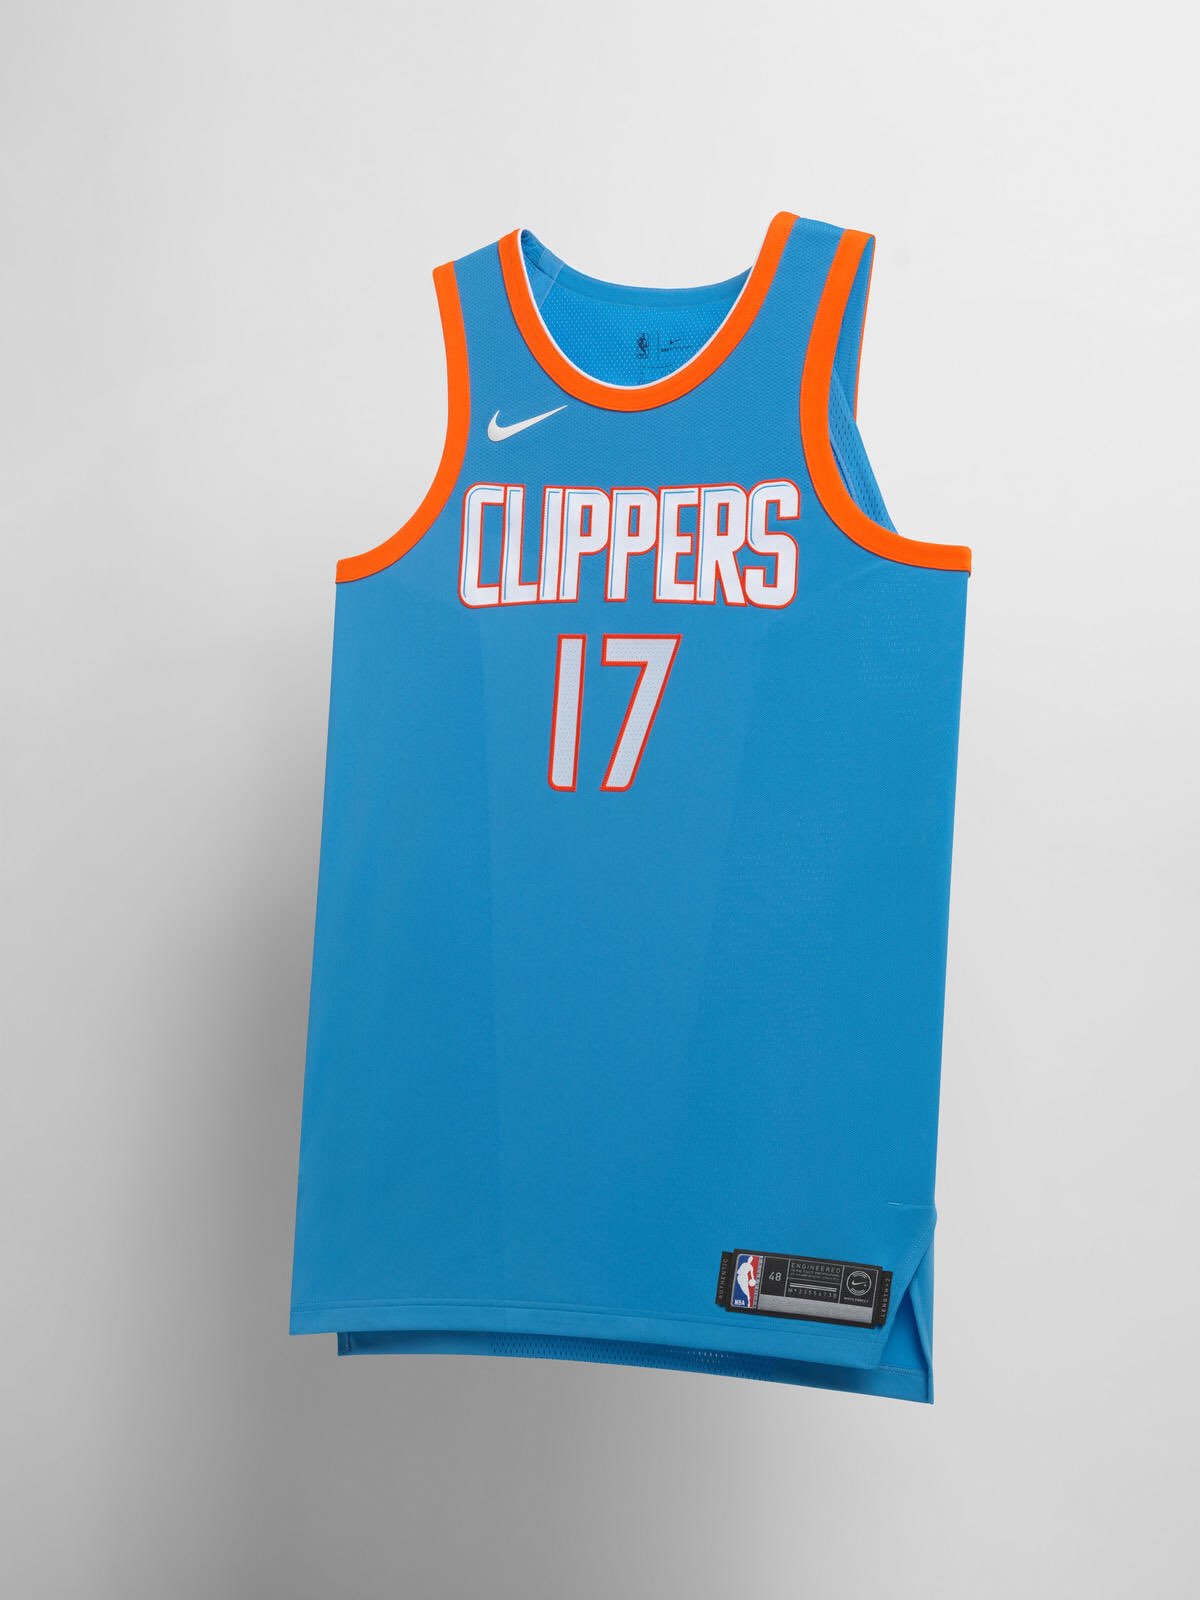 Arash Markazi on X: The Clippers “City” edition uniform is inspired by the San  Diego Clippers uniforms worn by Bill Walton.  / X